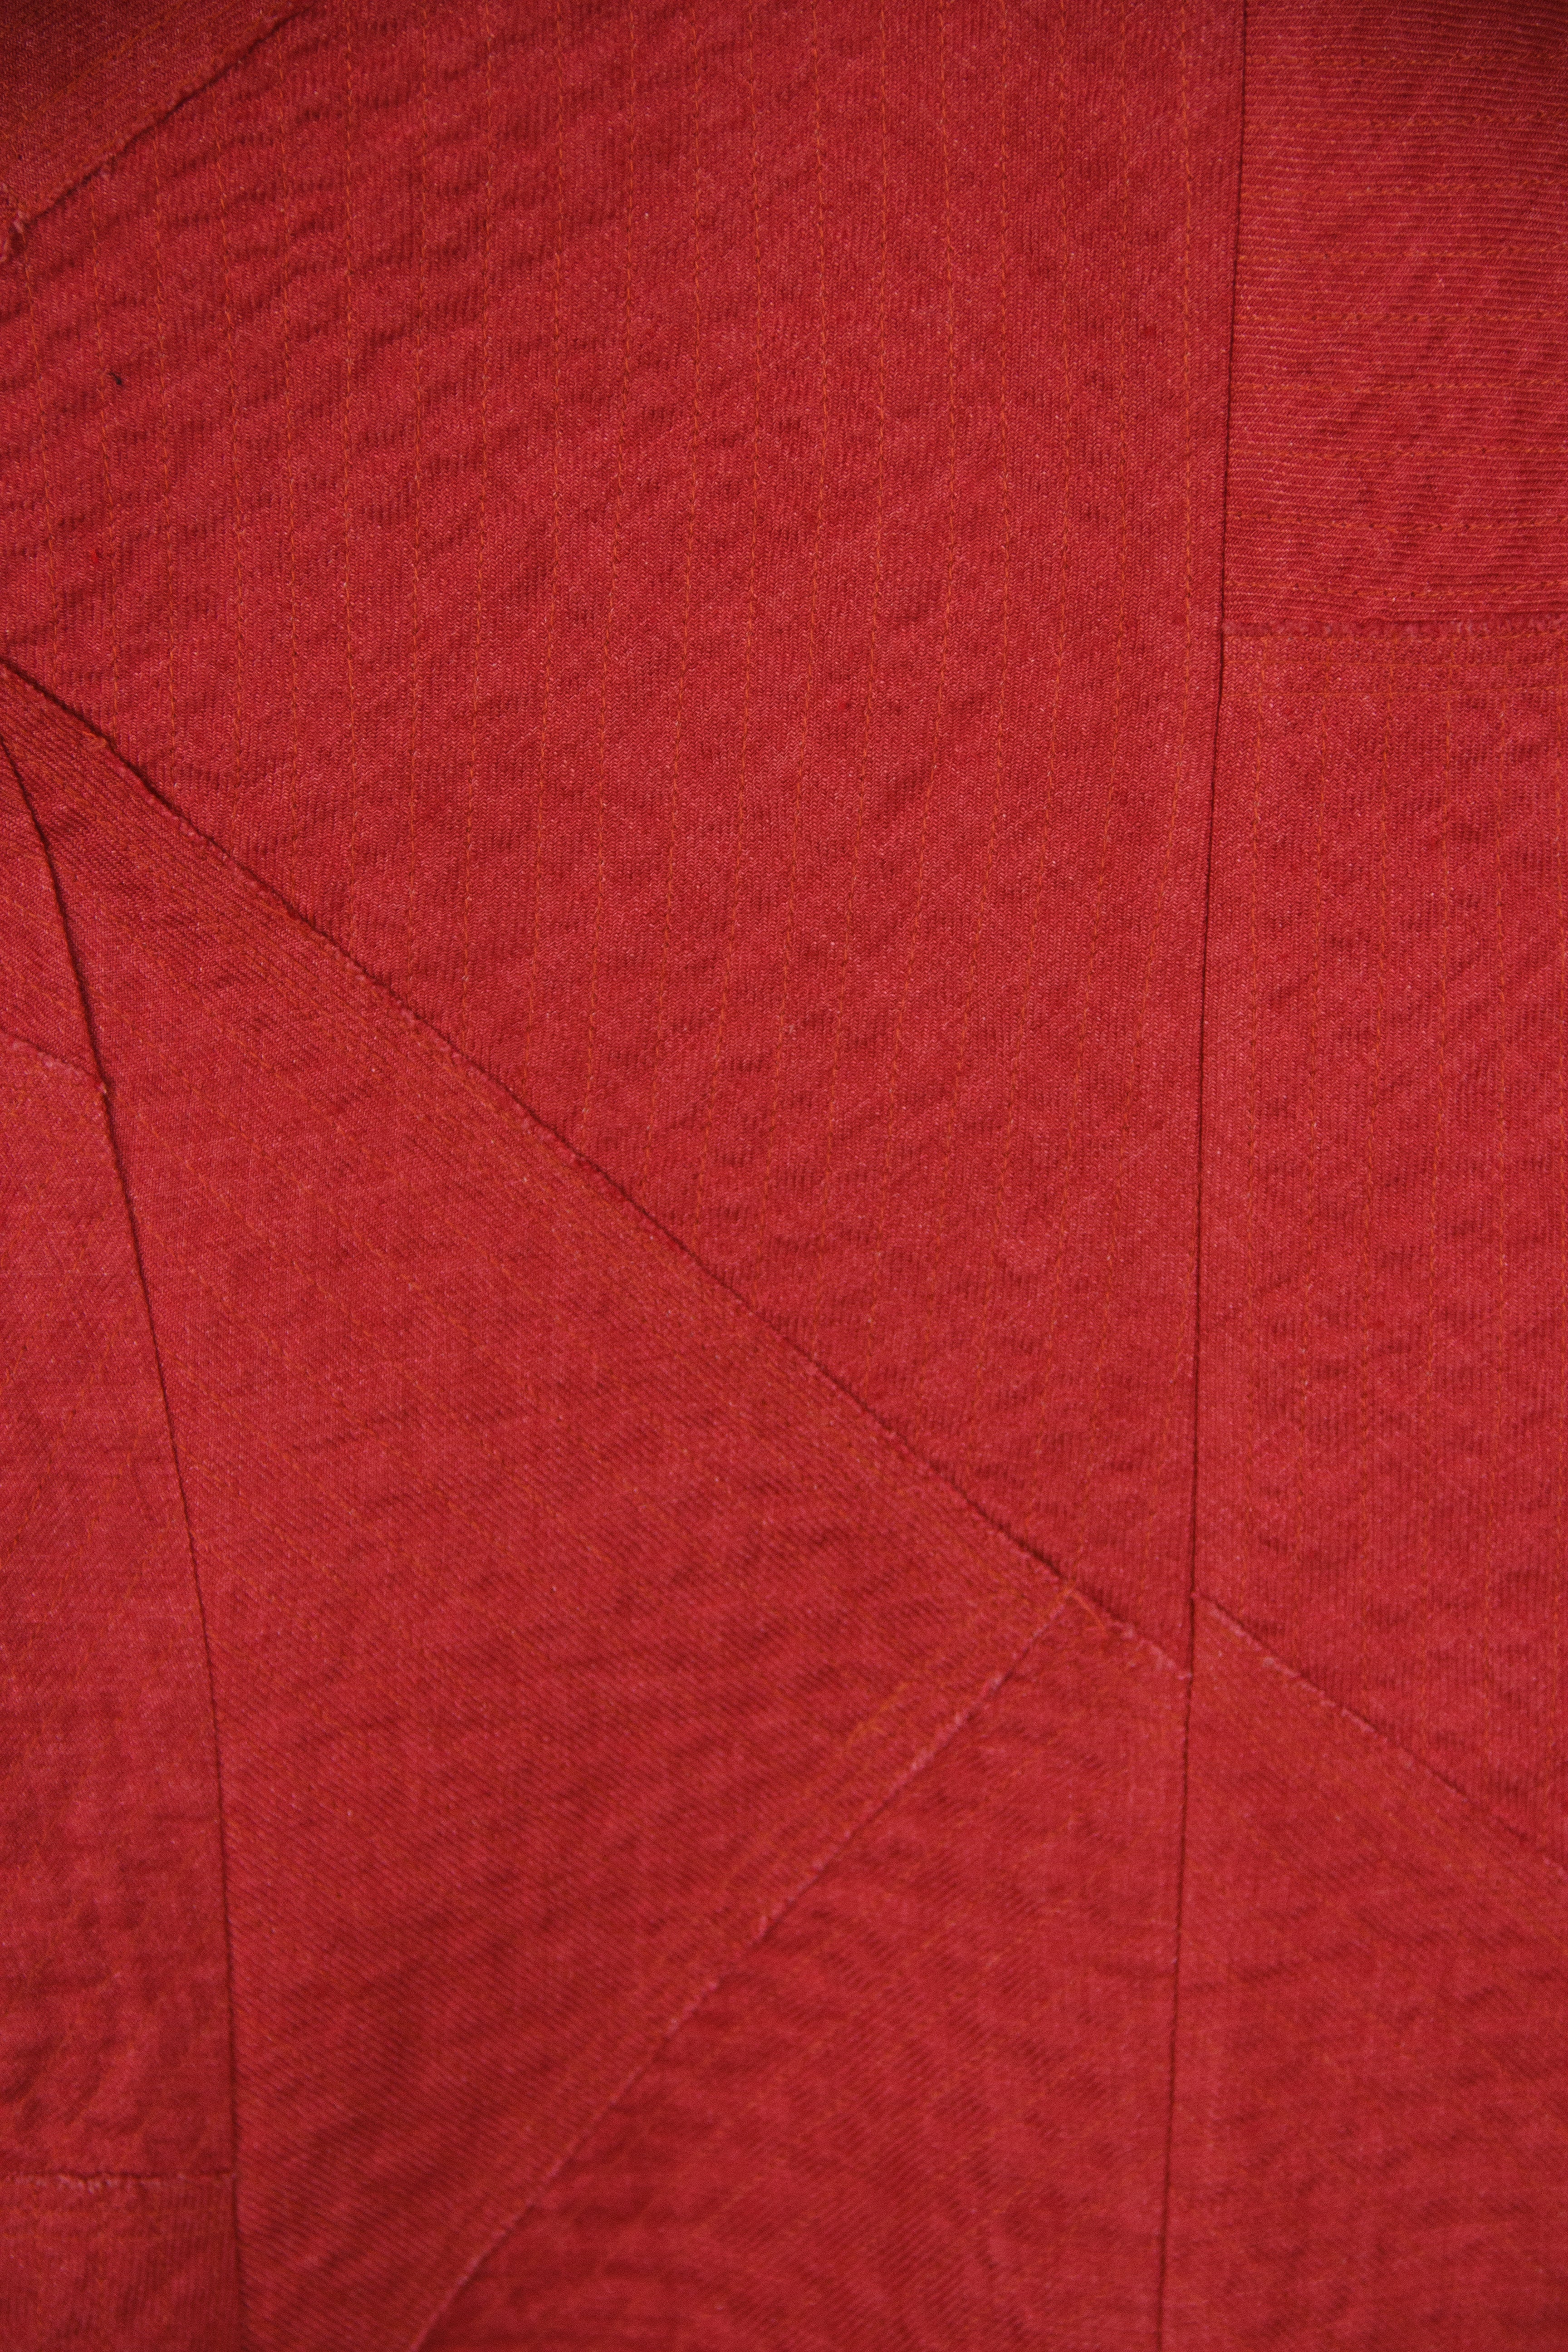 Lily Jacket in Red Raw-Pieced Italian Linen